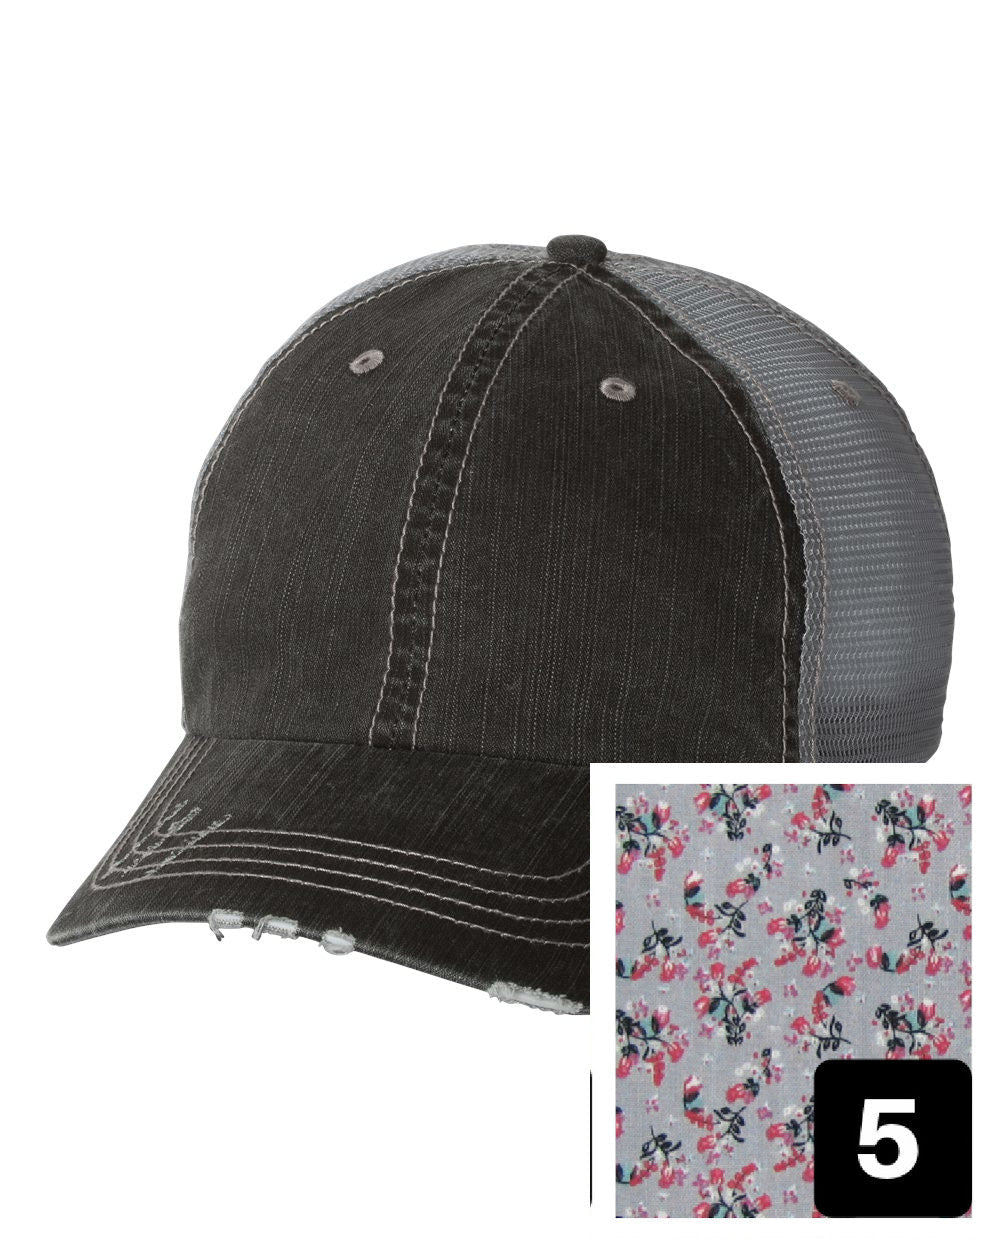 gray distressed trucker hat with purple and pink floral fabric state of Wisconsin